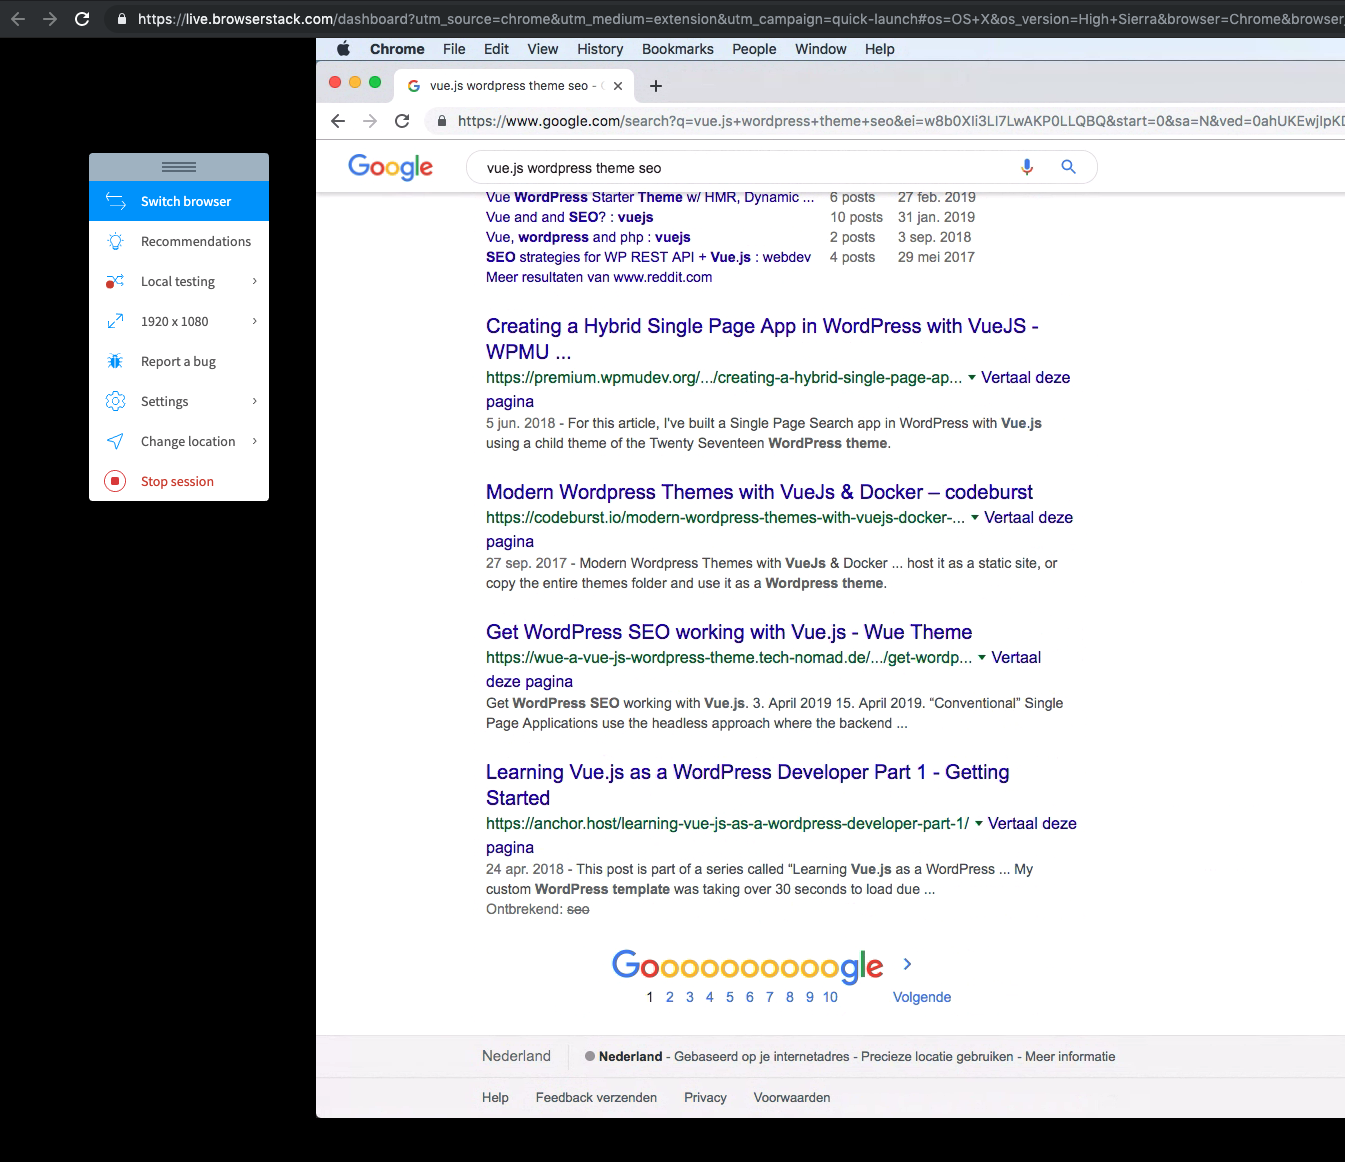 Search results after refactoring